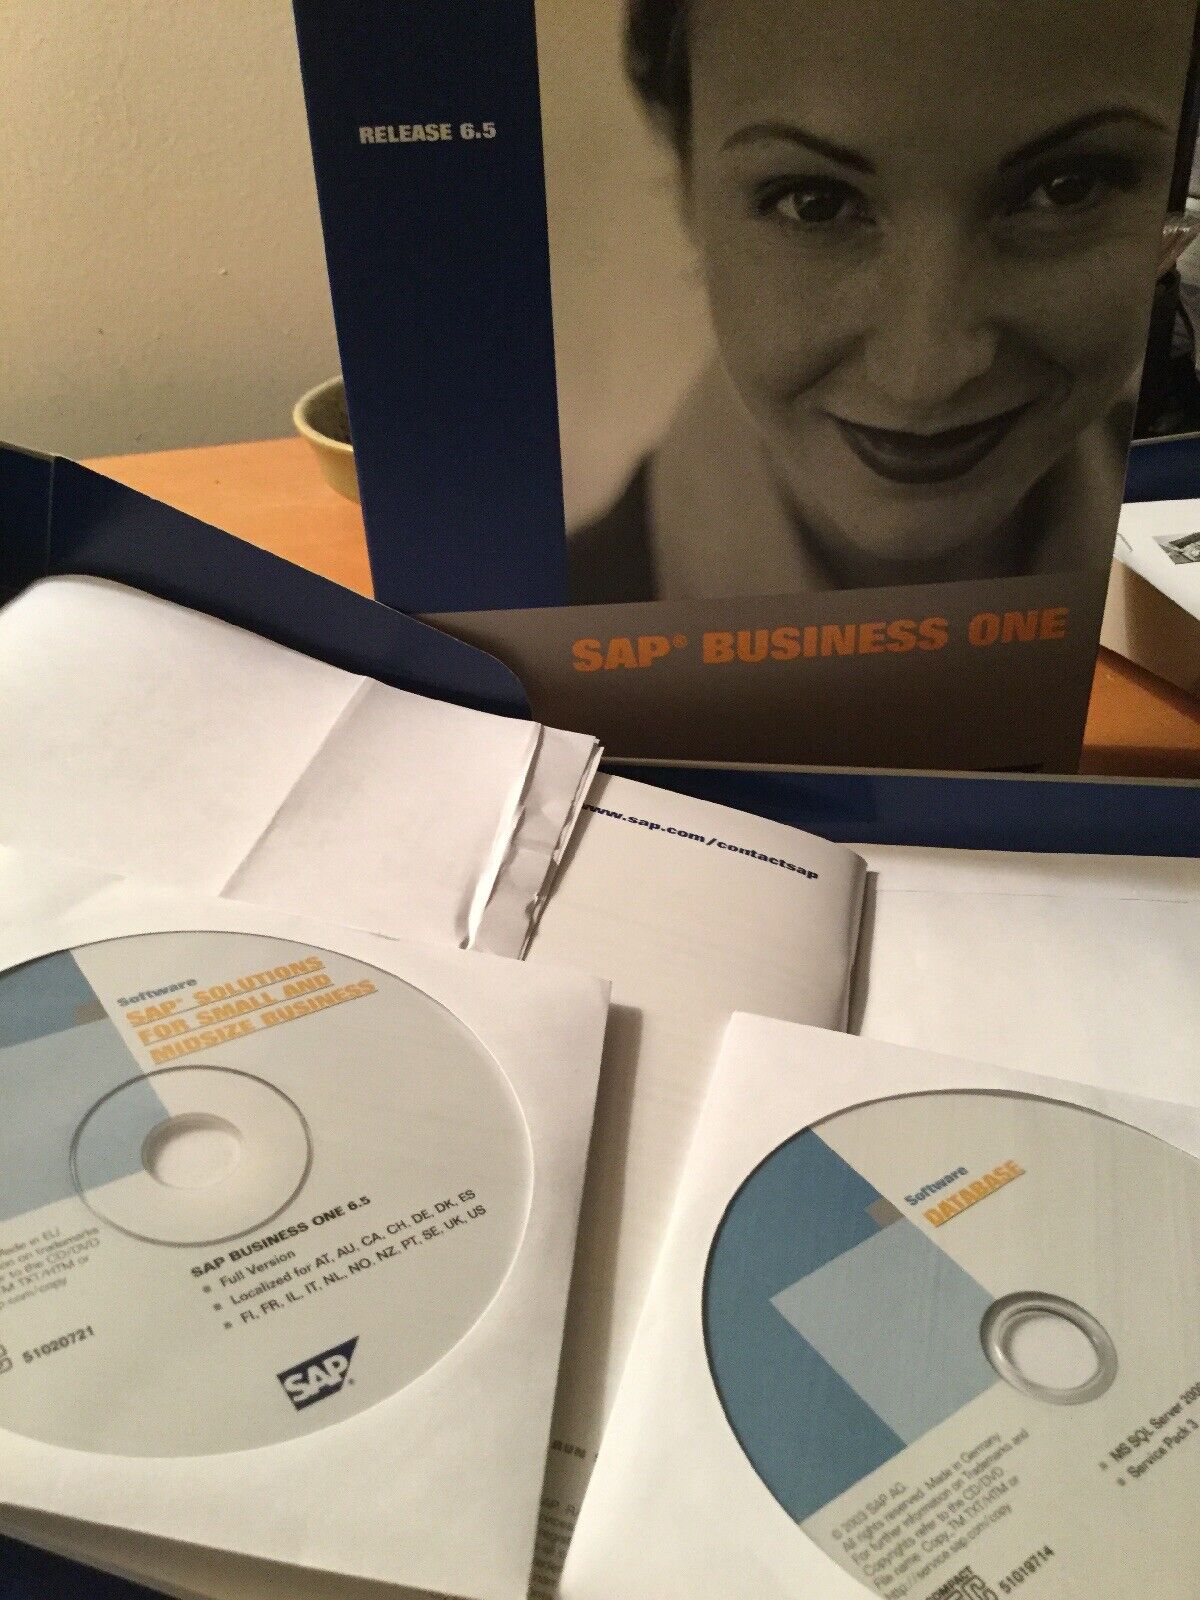 $75K SAP Small Business One. Complete System+Software Development Kit+MSSQL2000